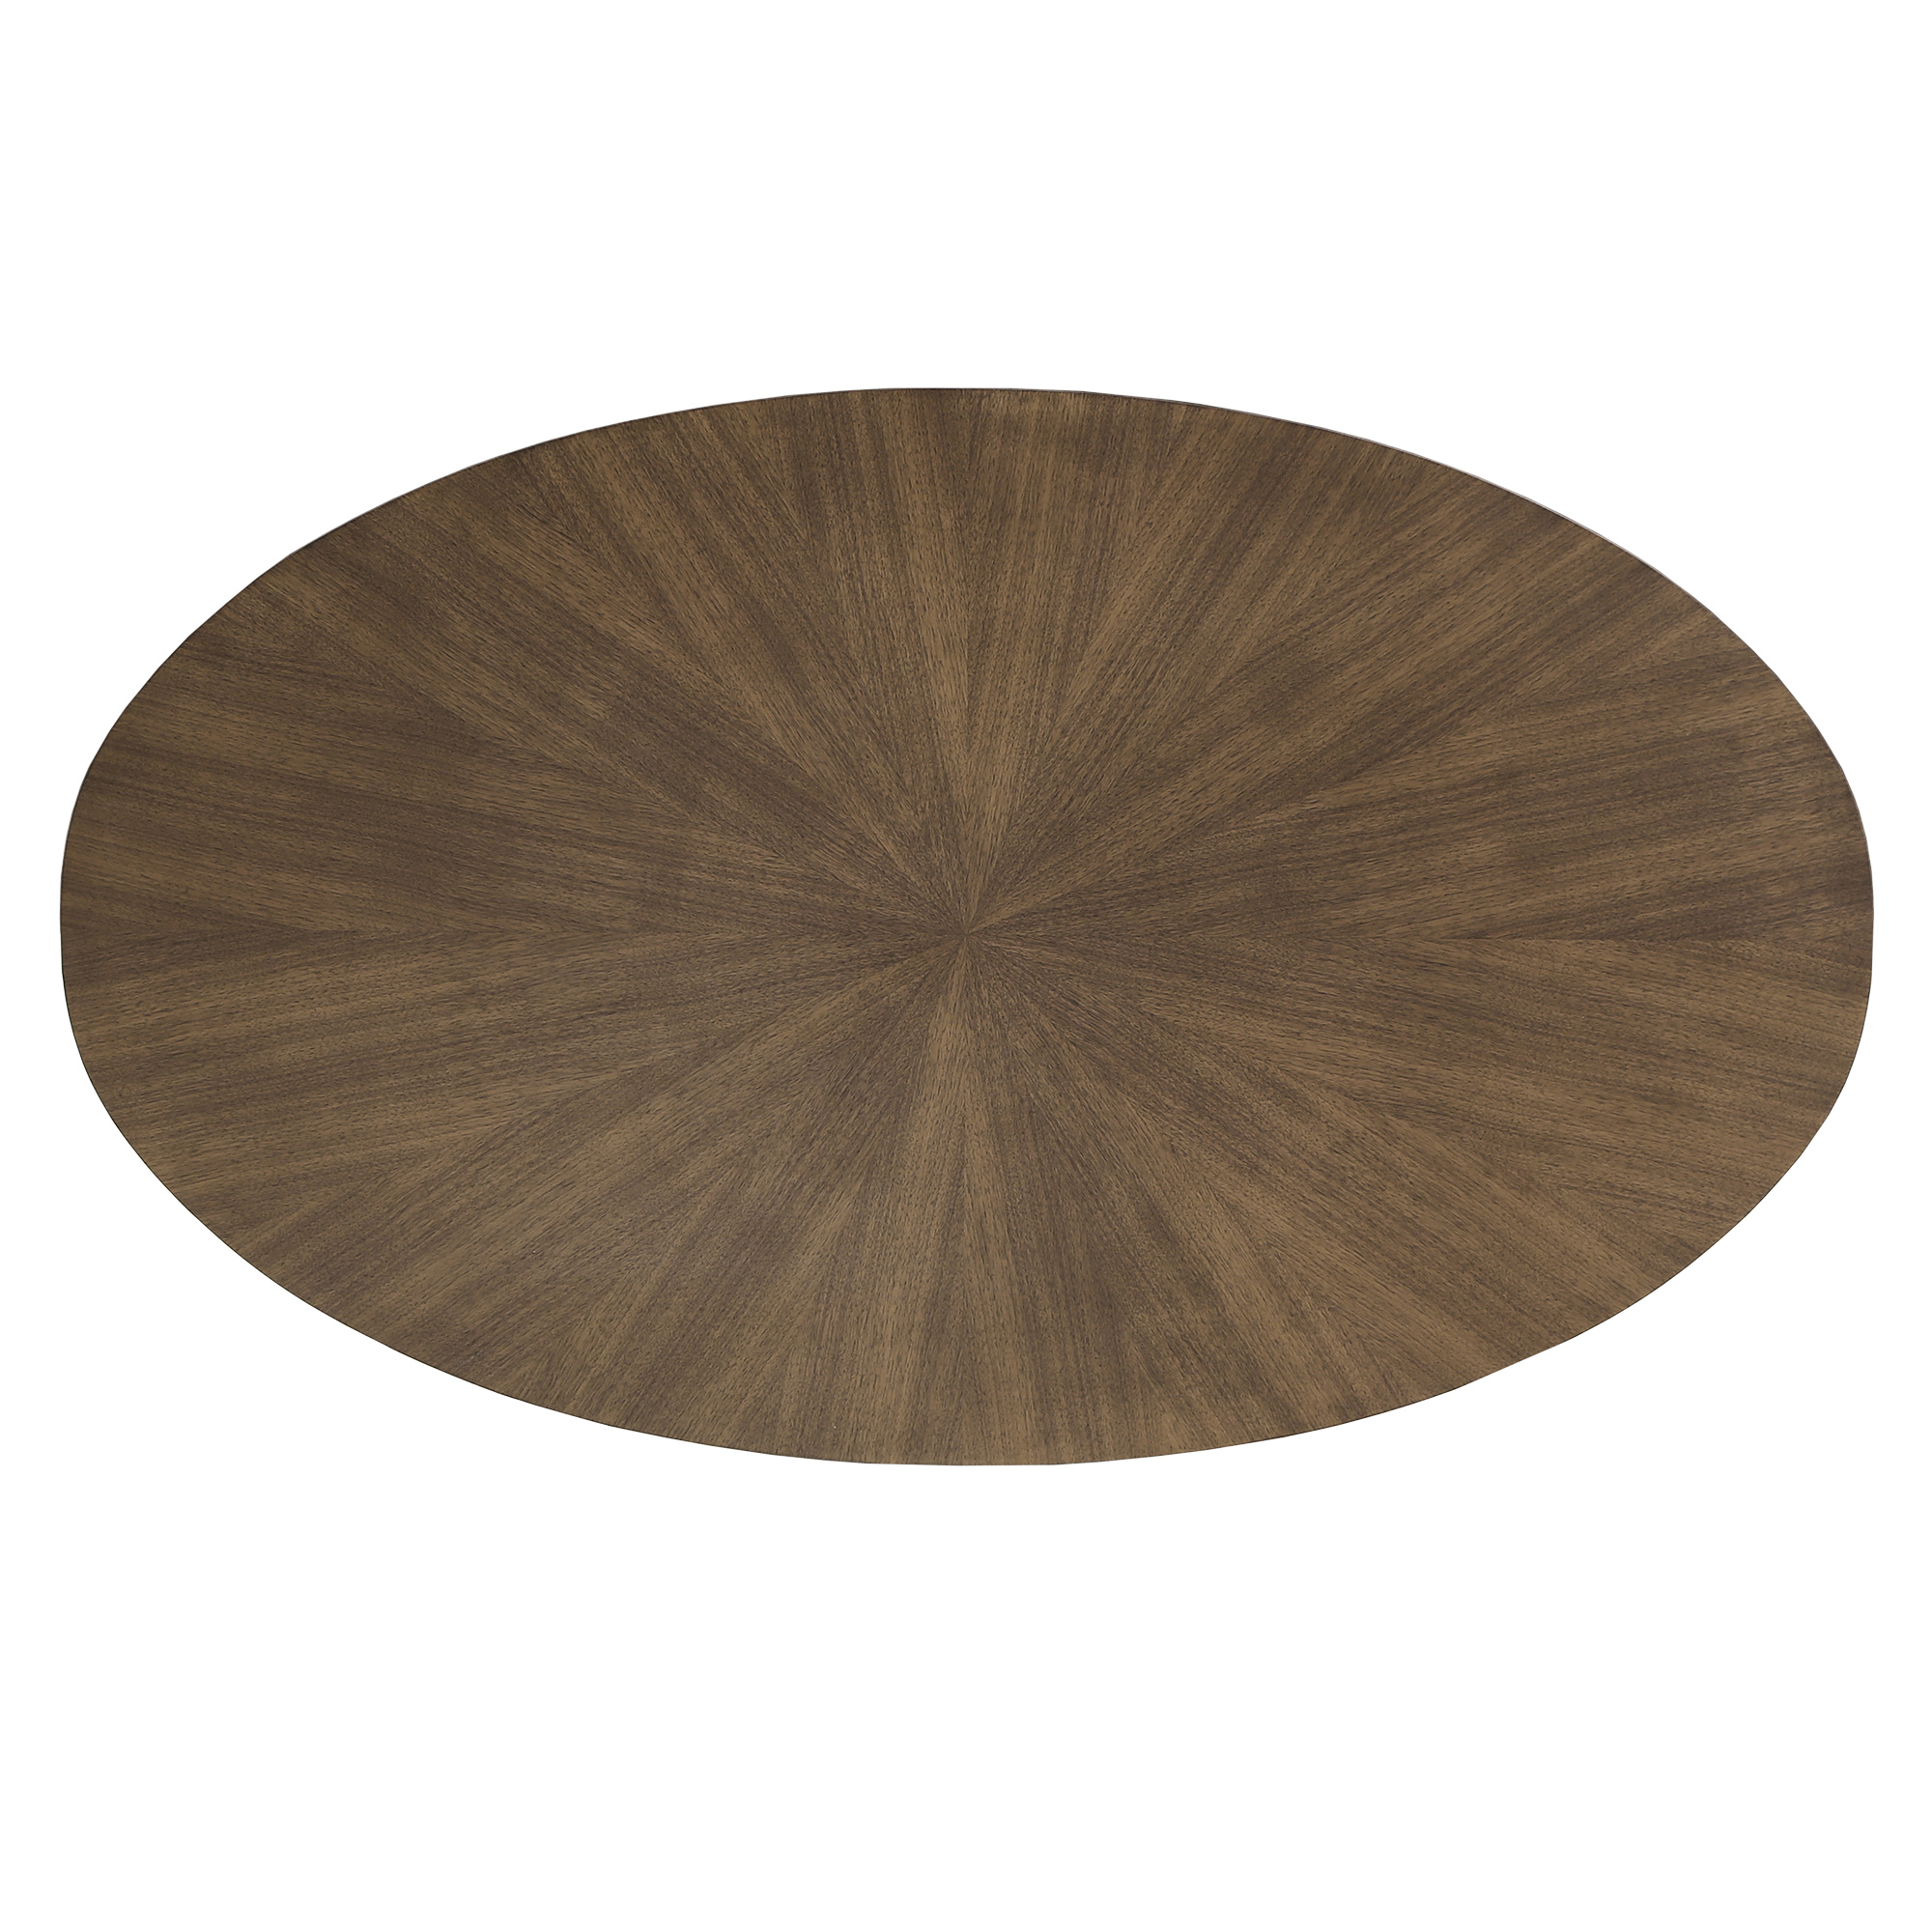 This is a top-down view of the Walnut Finish Oval Dining Table by iNSPIRE Q Modern. By viewing the table from the top, we can see the beautiful, sunburst inlay design.